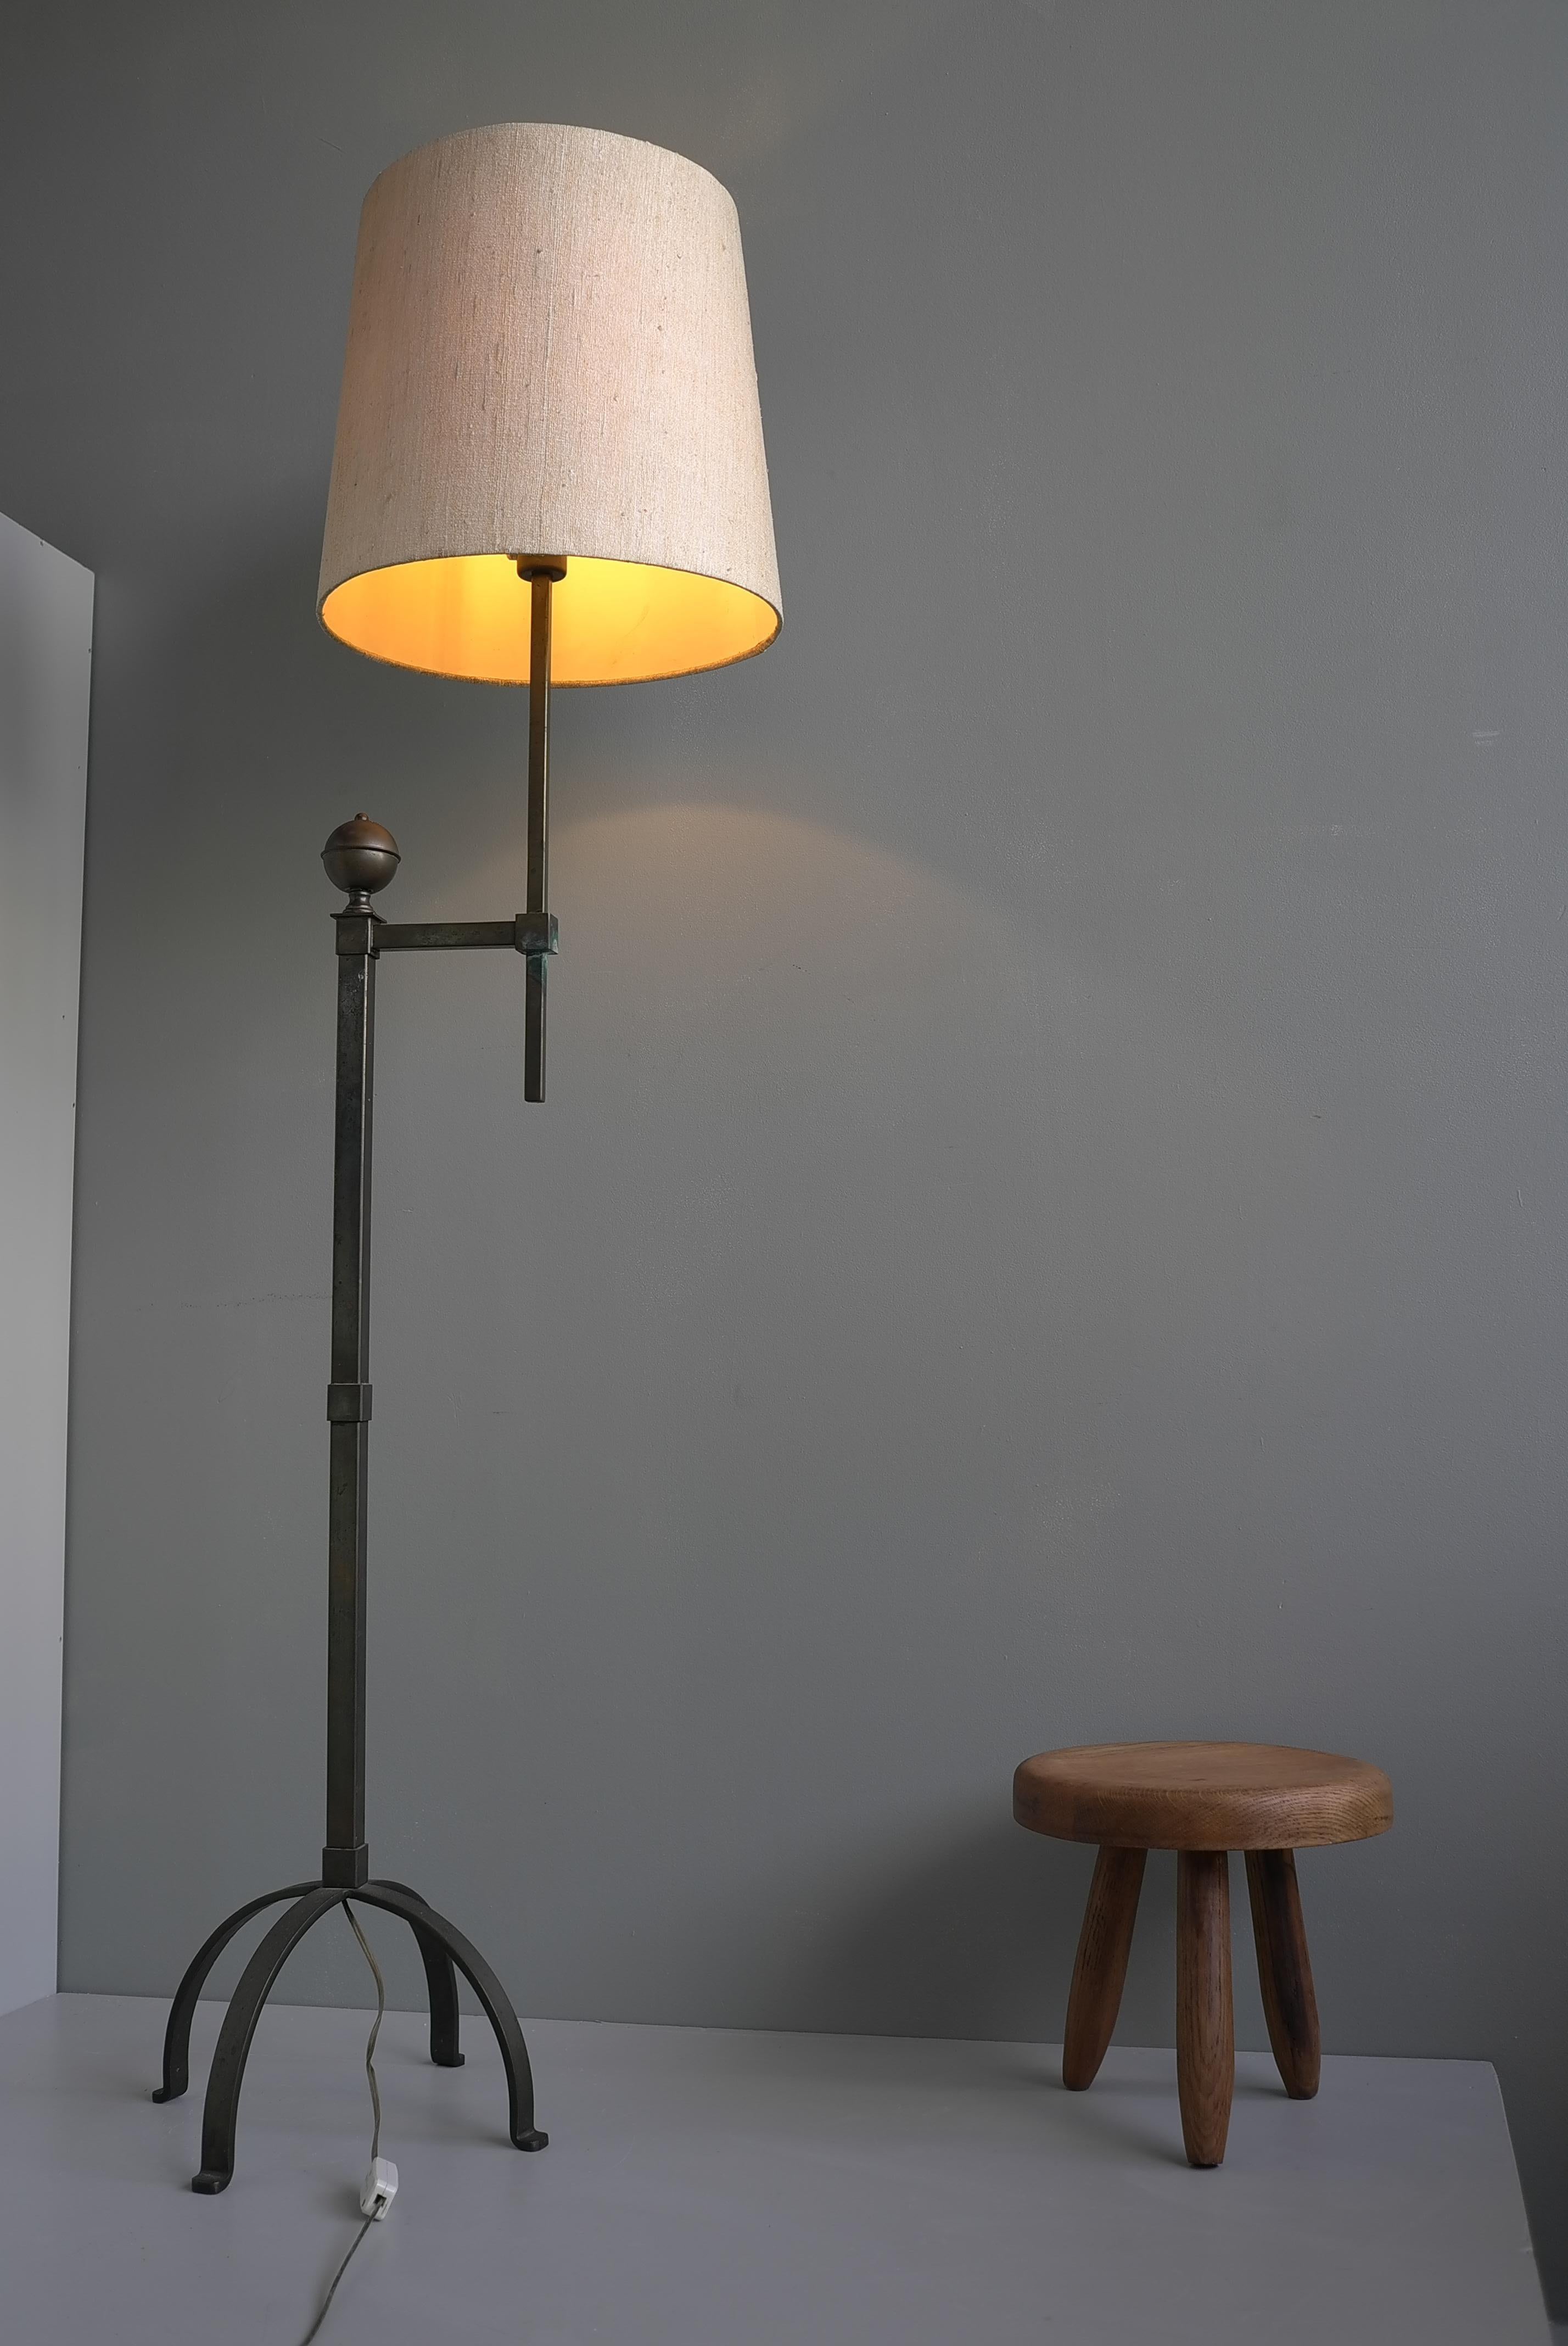 French Mid-Century Modern Copper and steel Patina Floor lamp 1950's
